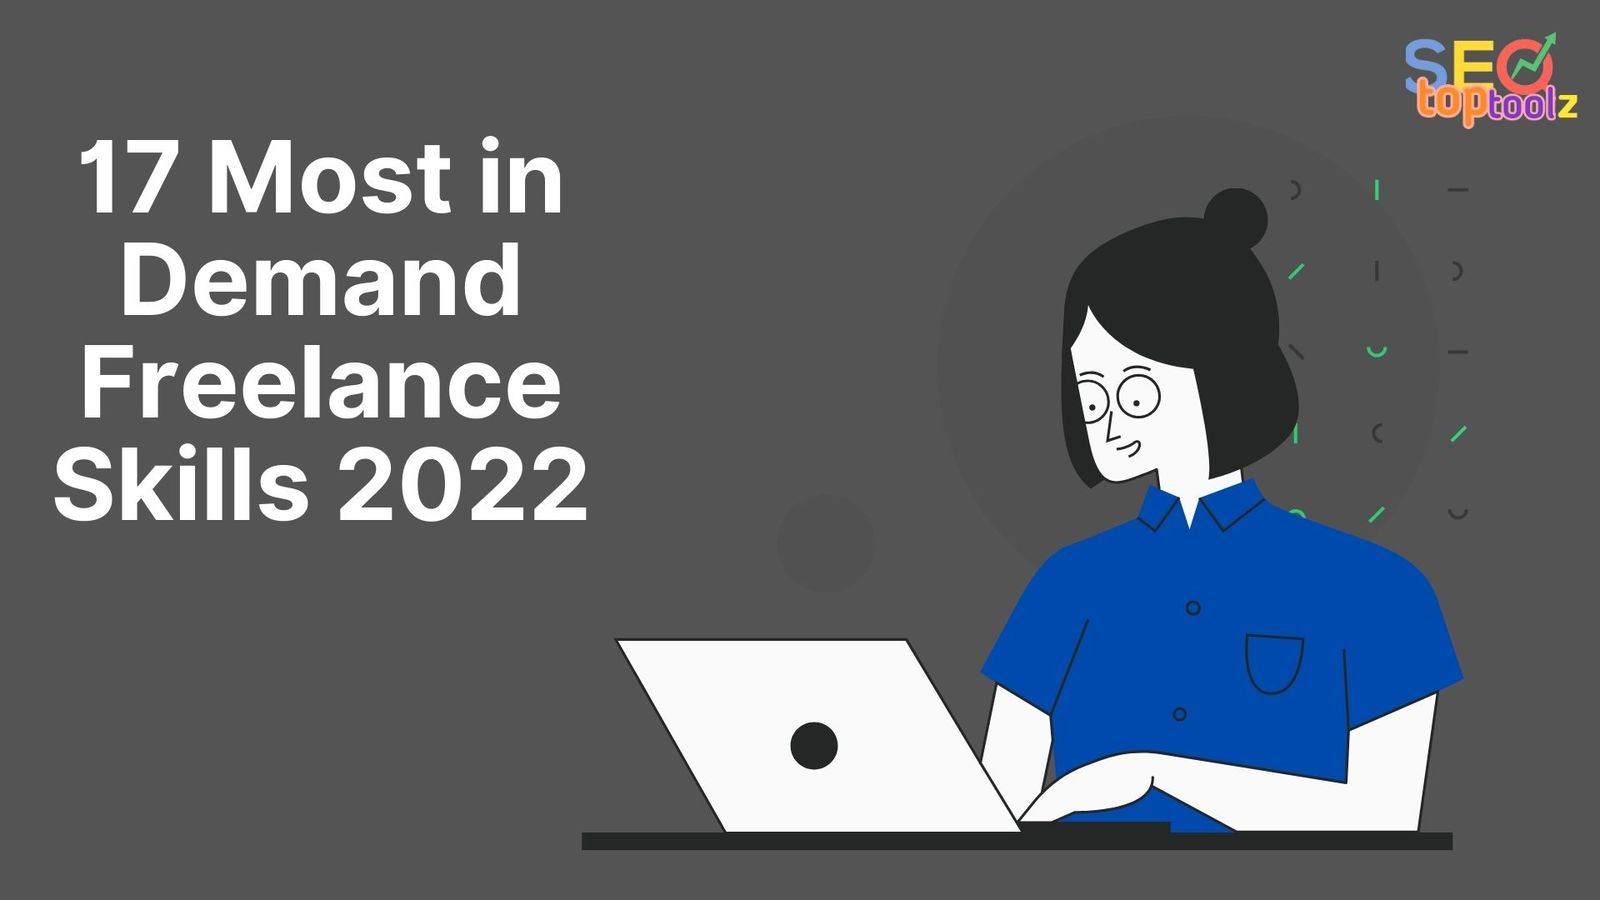 17 Fastest Growing Freelance Skills | Best Freelancing Skill, 17 Most in Demand Freelance Skills 2022 - Top Freelancing Skills, 17 Most in Demand Freelance Skills in us 2022, best freelance skills to learn 2022, best freelancing skills, best freelancing skills for students, best freelancing skills to learn, best skills for freelancing 2022, best skills to learn for freelancing, best skills to learn in 2021 for freelancing, data entry skills for freelancer, digiskills freelancing, easiest freelance skills to learn, fastest growing freelance jobs, fastest growing freelance skills, fiverr gigs that require no skill, fiverr most in demand skills 2022, freelance skills, freelance skills list, freelance skills you can learn quickly, freelancing skills in demand, freelancing skills in demand 2022, freelancing skills to learn, freelancing skills with less competition, high demand freelance skills, high paying freelance skills, highest paid freelance skills, highest paying freelance skills, highest paying freelance skills 2021, highest paying freelance skills 2022, in demand freelance skills, in demand freelance skills 2022, most demanding freelancing skills, most demanding freelancing skills in 2022, most demanding skills on fiverr 2022, most demanding skills on upwork 2021, most important soft skill to become a freelancer is, most in demand freelance skills, most in demand freelance skills 2021, most in demand freelance skills 2022, most in-demand freelance skills 2021 most in-demand freelance skills 2021 upwork, skills for fiverr, skills for freelancing jobs, skills needed for freelancing, skills required for freelancing, skills to learn for freelancing, top 10 freelancing skills, top 10 skills for freelancing, top 5 freelancing skills in demand, top freelance skills 2022, top freelancing skills, top freelancing skills in 2022, top in demand freelance skills, top skills for freelancing, top skills for freelancing 2022, types of freelancing skills